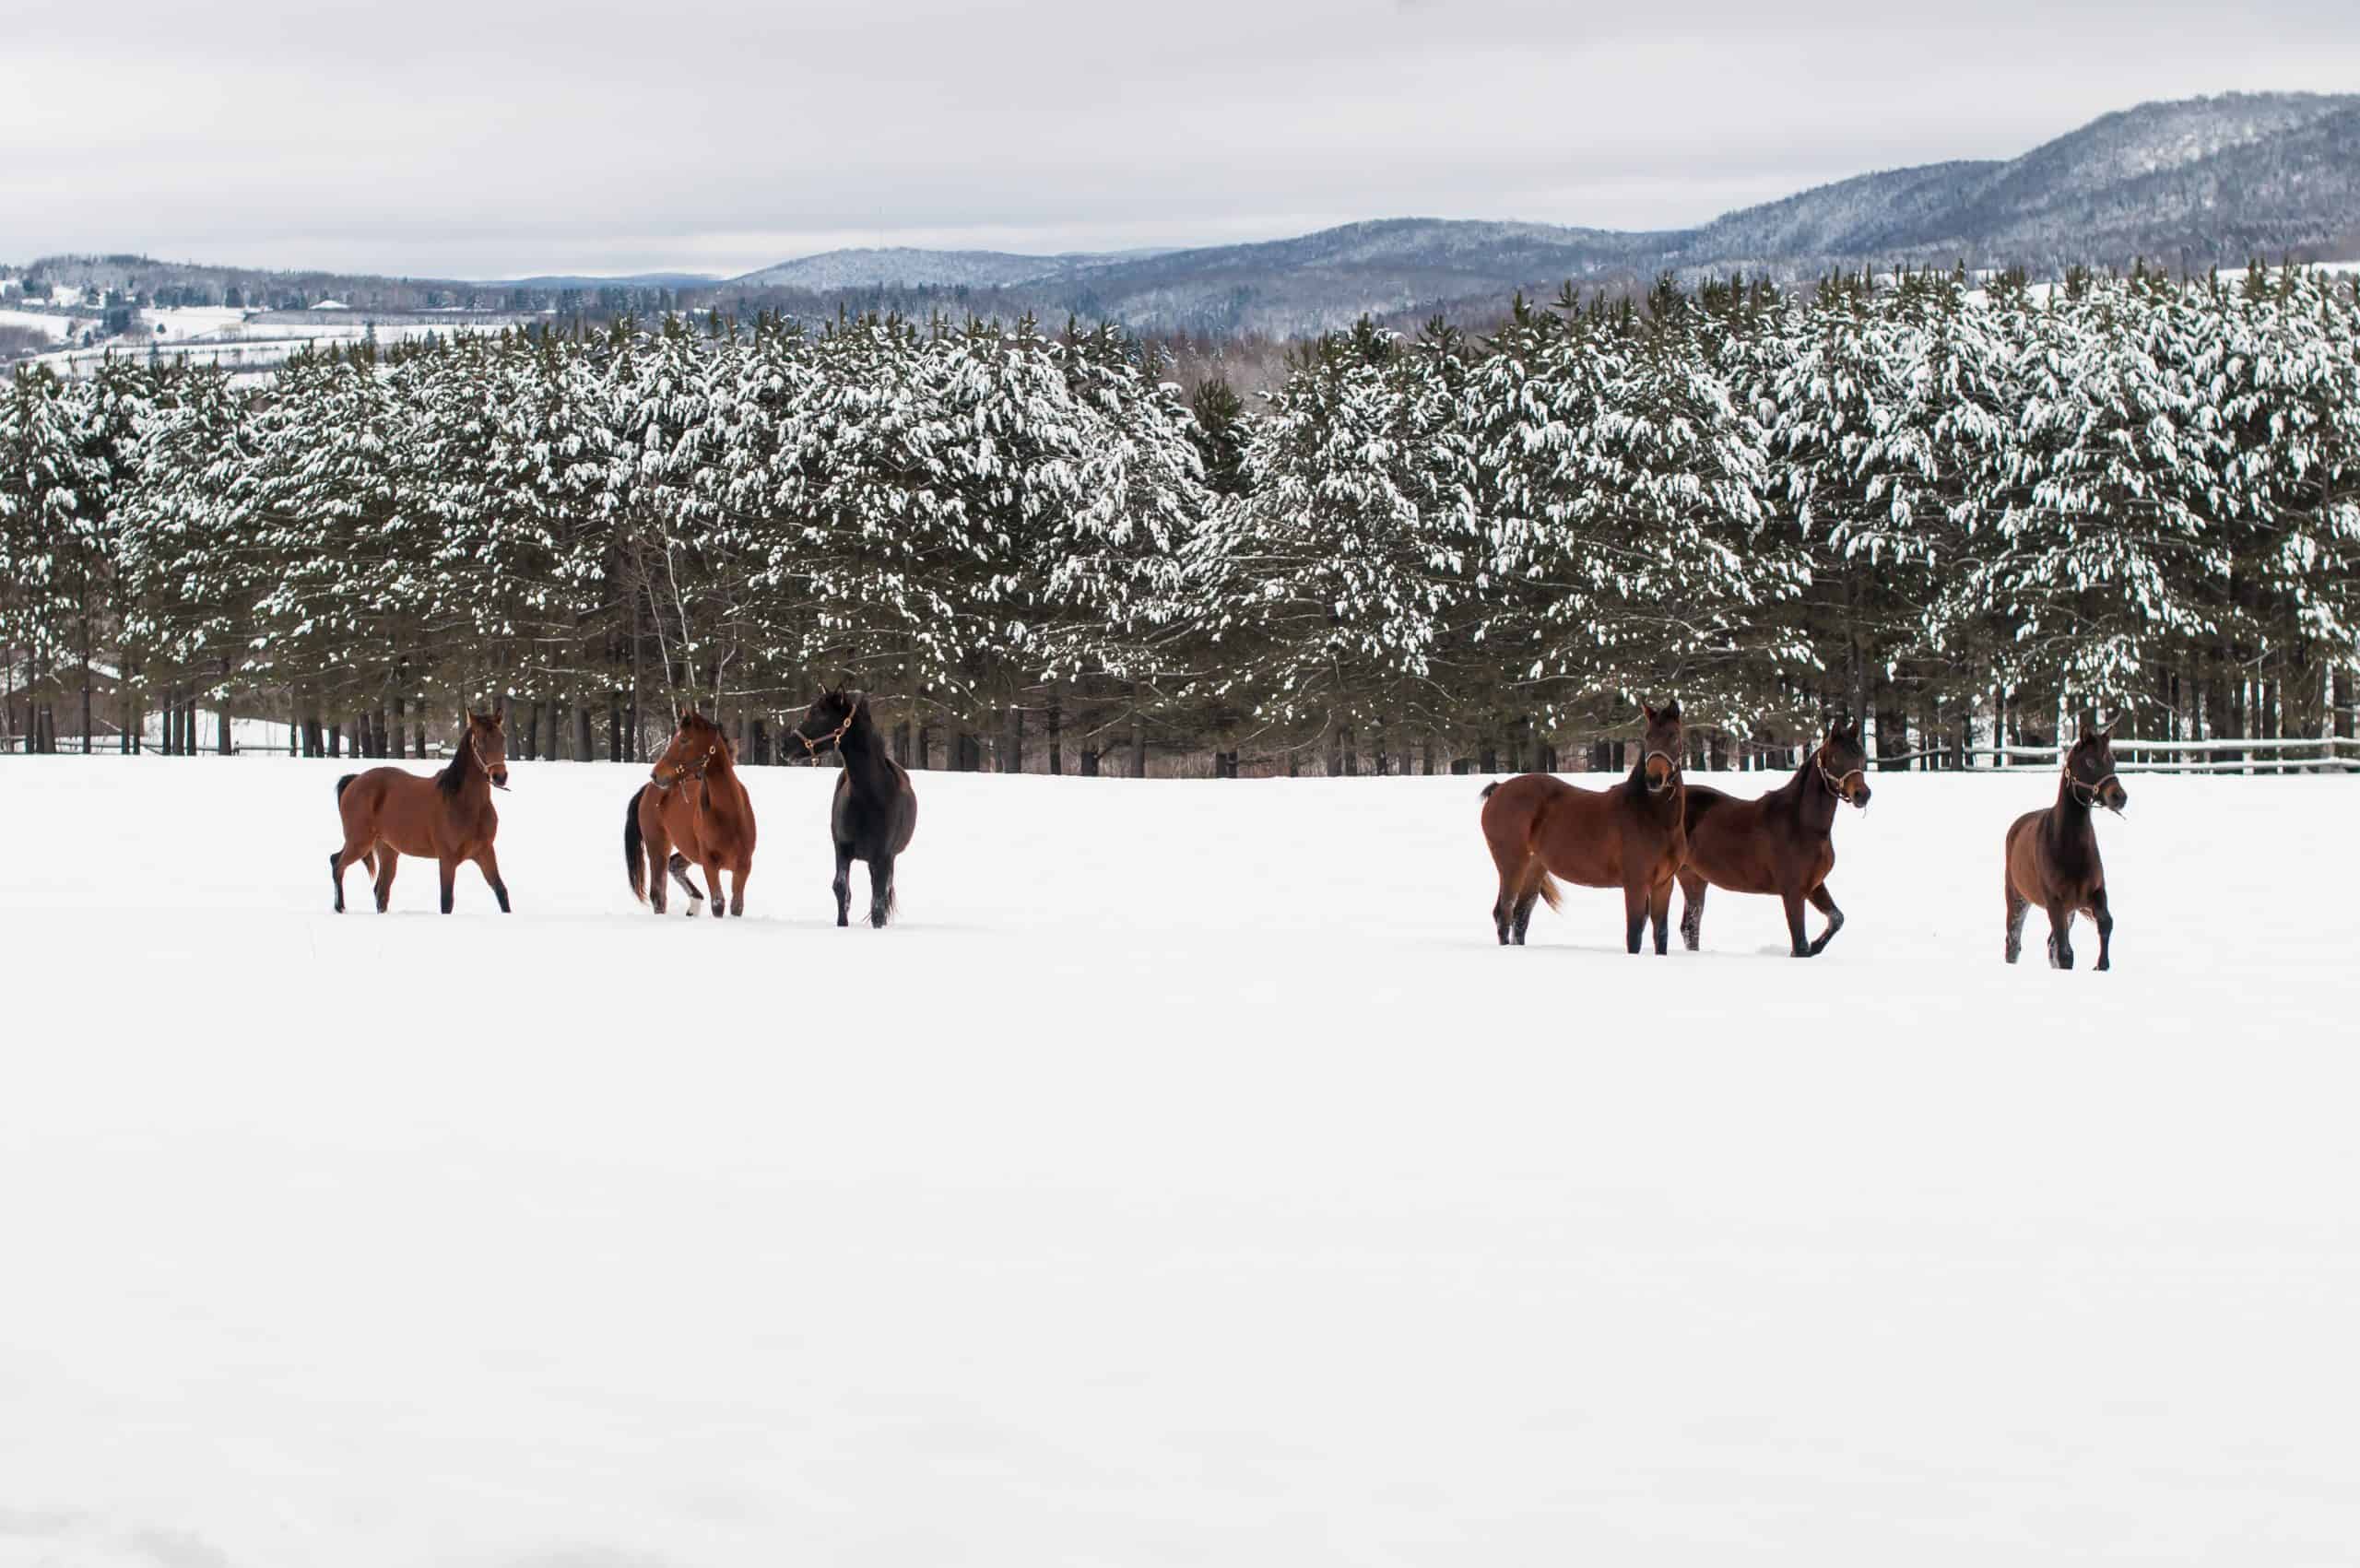 Group of Morgan horses in winter. Tall pine trees in the background and mountain range. Brown and black horses standing near a fence on a country farm. Bright white snow on the ground and cloudy skies. Christmas season, holidays, equine photography. Horizontal orientation.